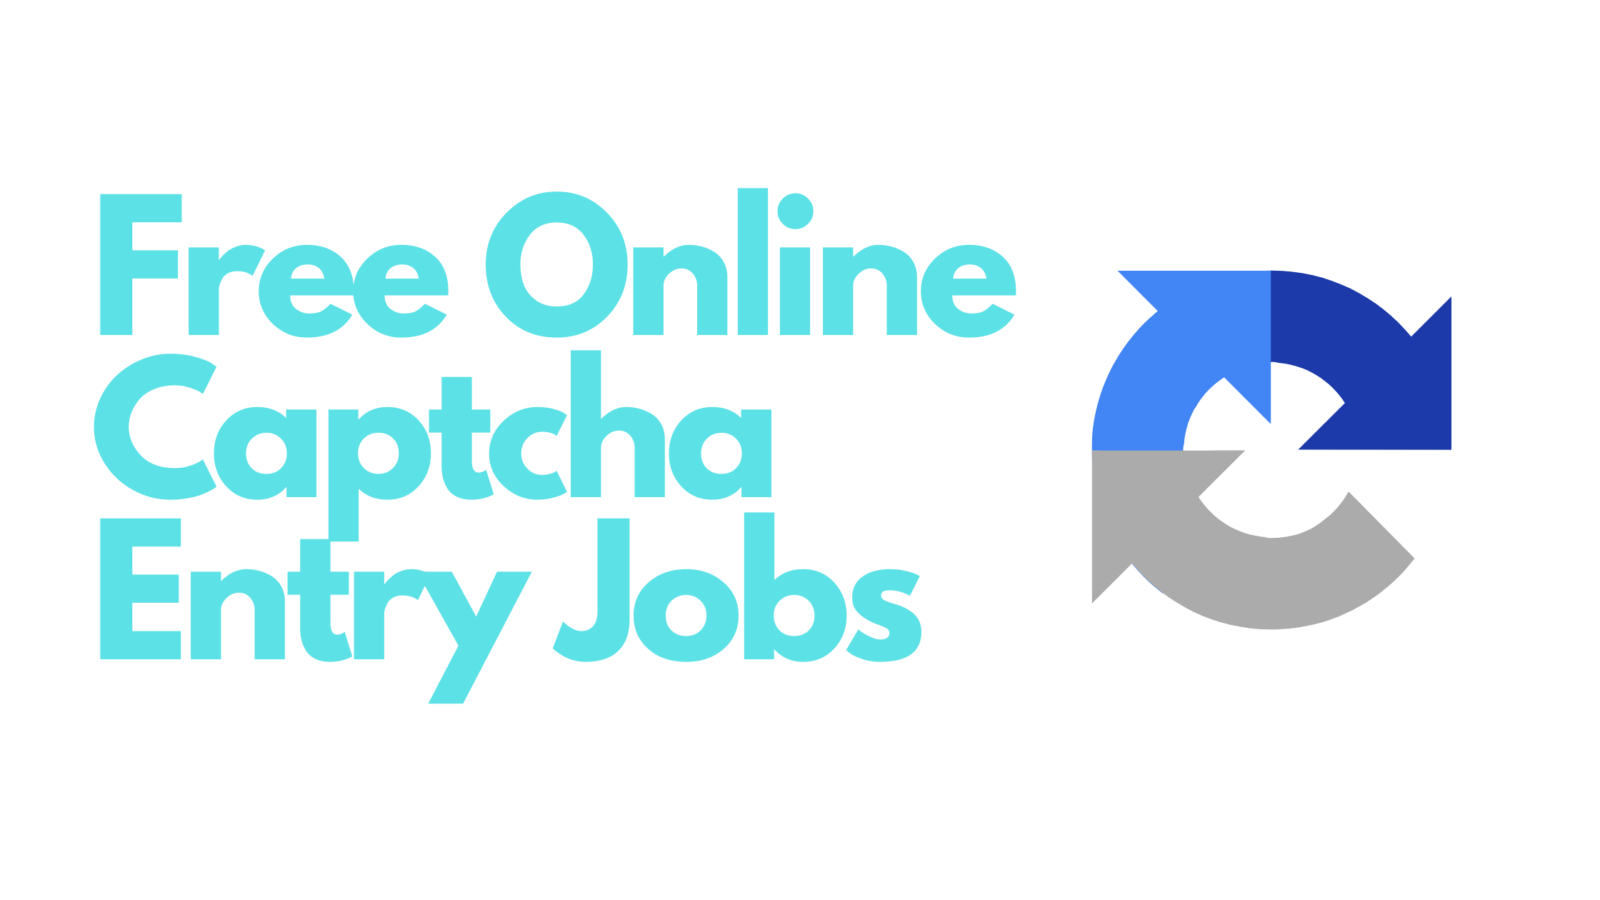 captcha typing jobs from home without investment